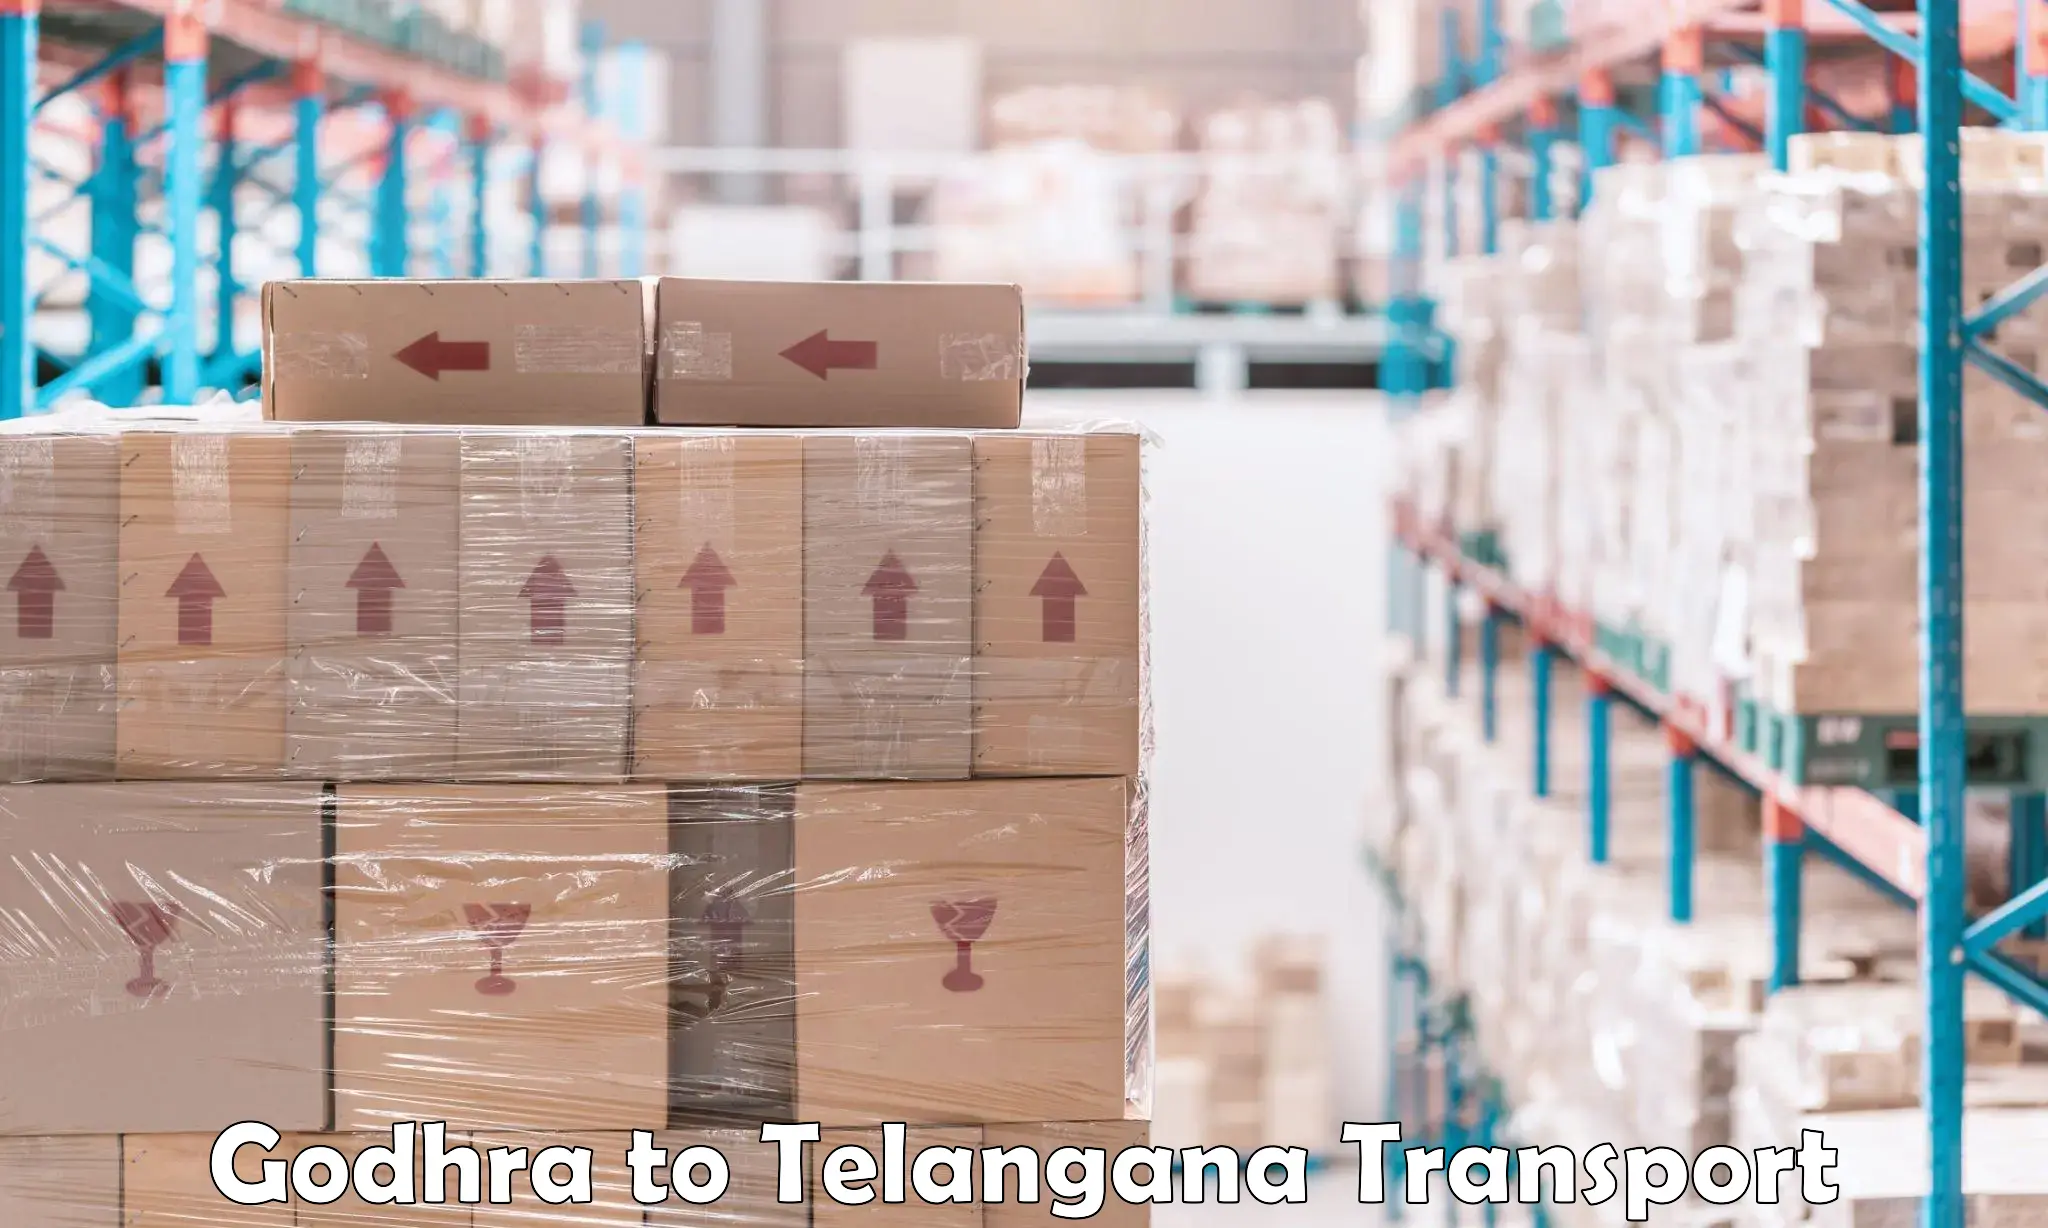 Container transport service Godhra to Telangana